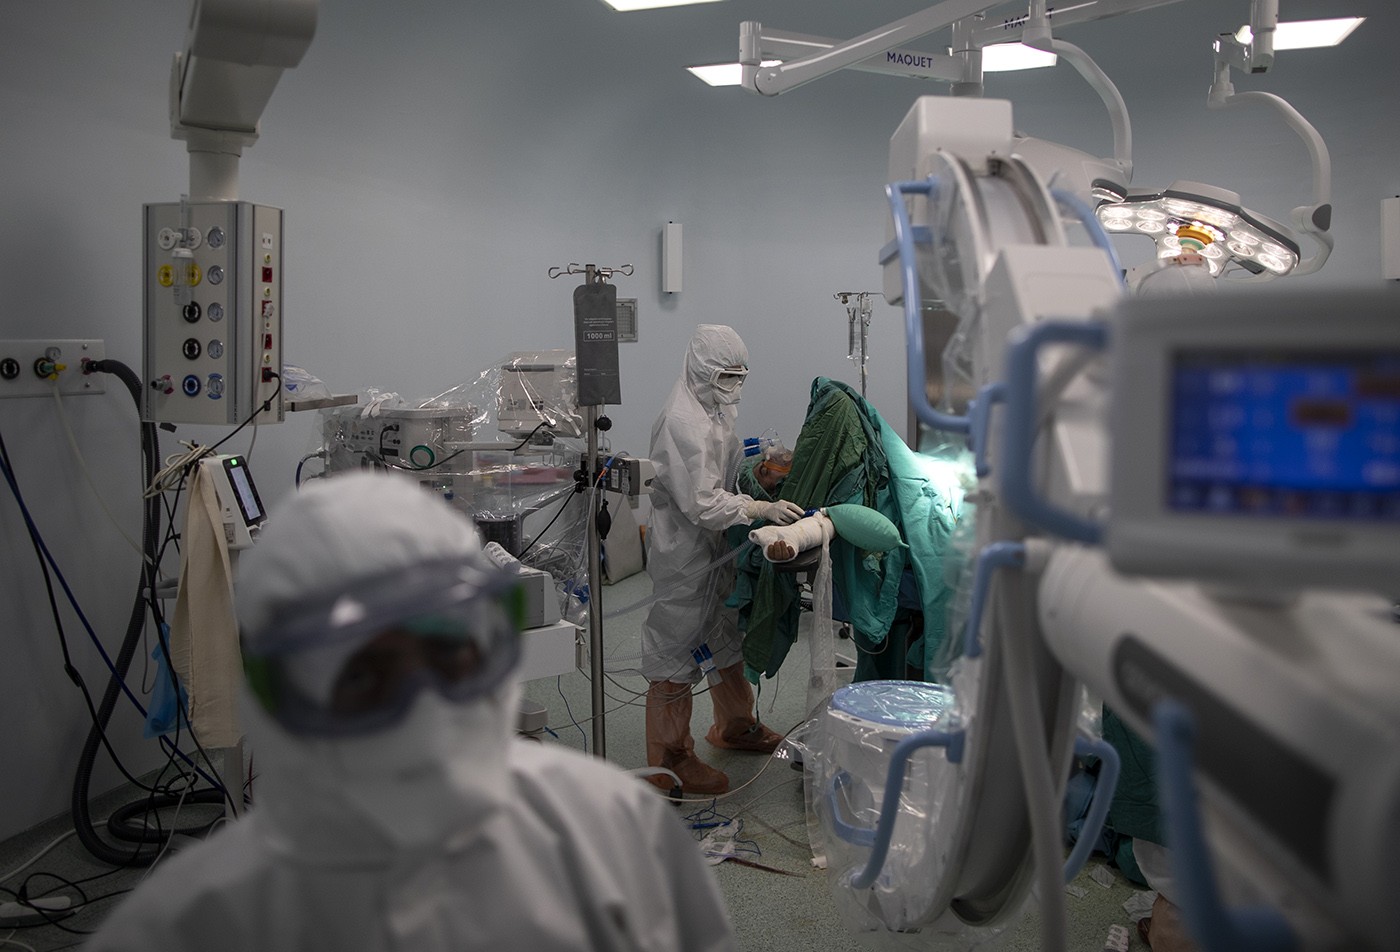 Medical workers wearing Personal Protective Equipment (PPE) perform surgery on to COVID-19 patient at the Sancaktepe Martyr Prof Dr Ilhan Varank Training and Research Hospital in Istanbul, Turkey, 11 May 2020.